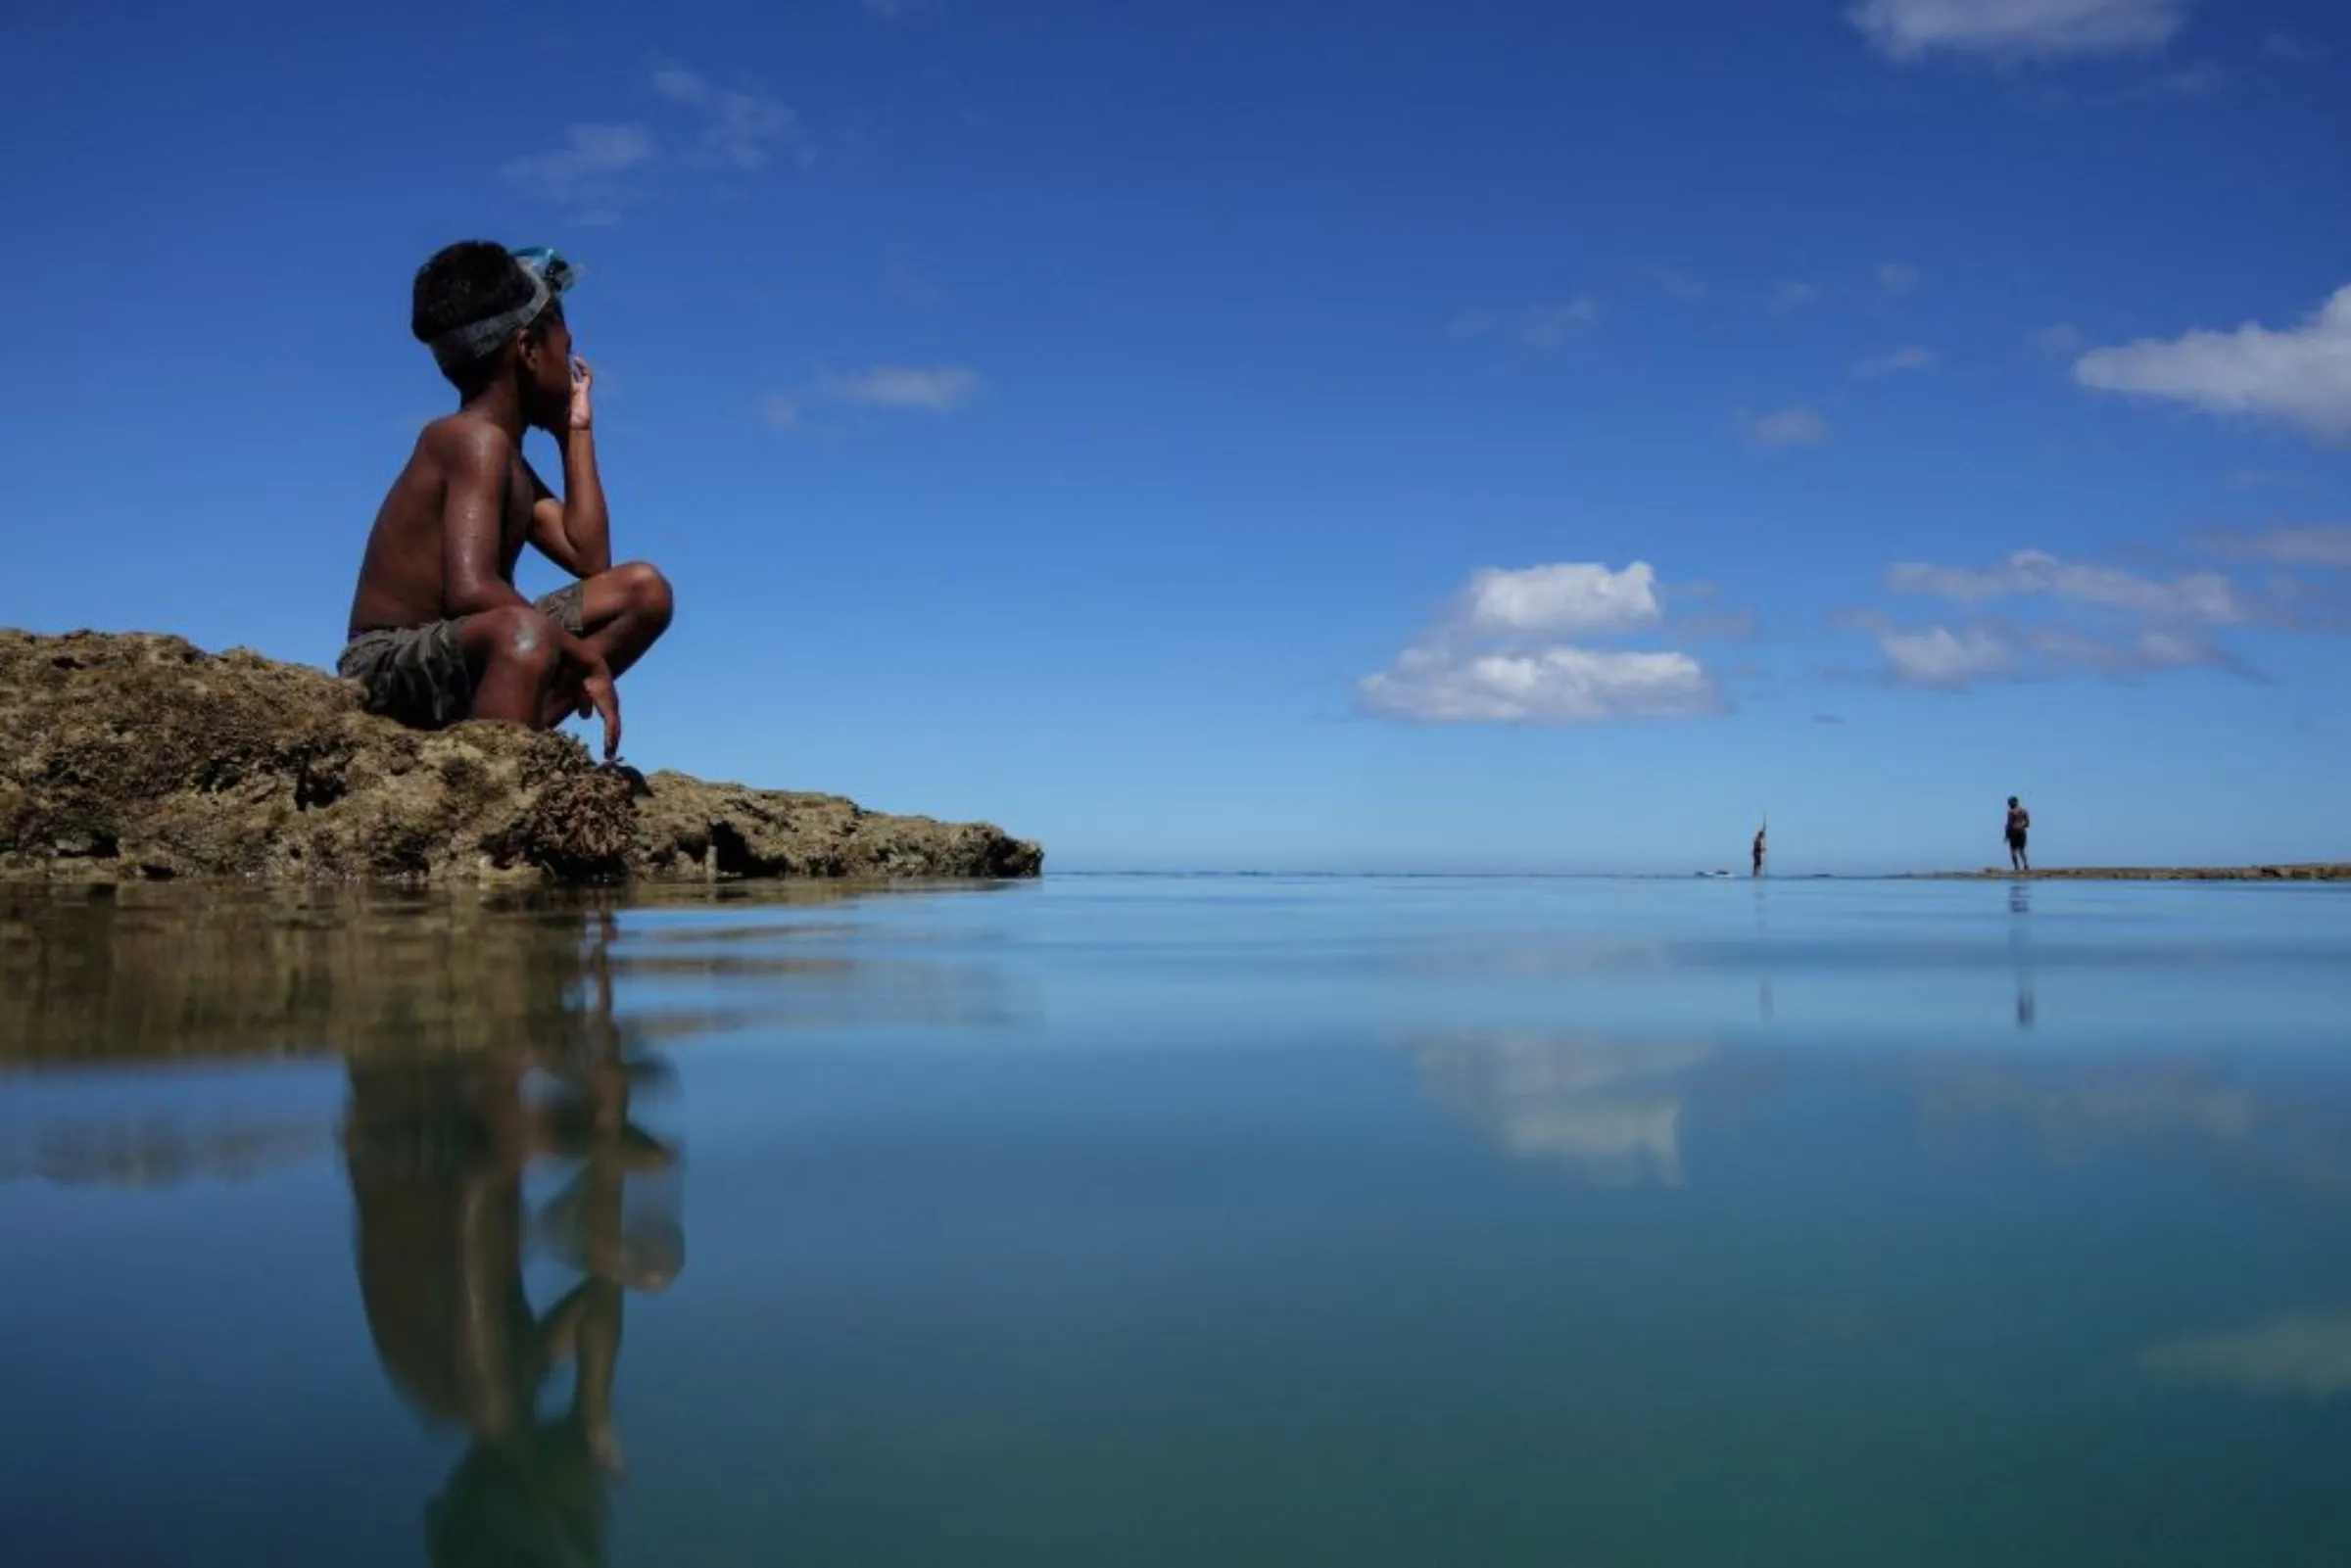 Local boy takes a break from diving in the sea at Serua Village, Fiji, July 14, 2022. As the community runs out of ways to adapt to the rising Pacific Ocean, the 80 villagers face the painful decision whether to move